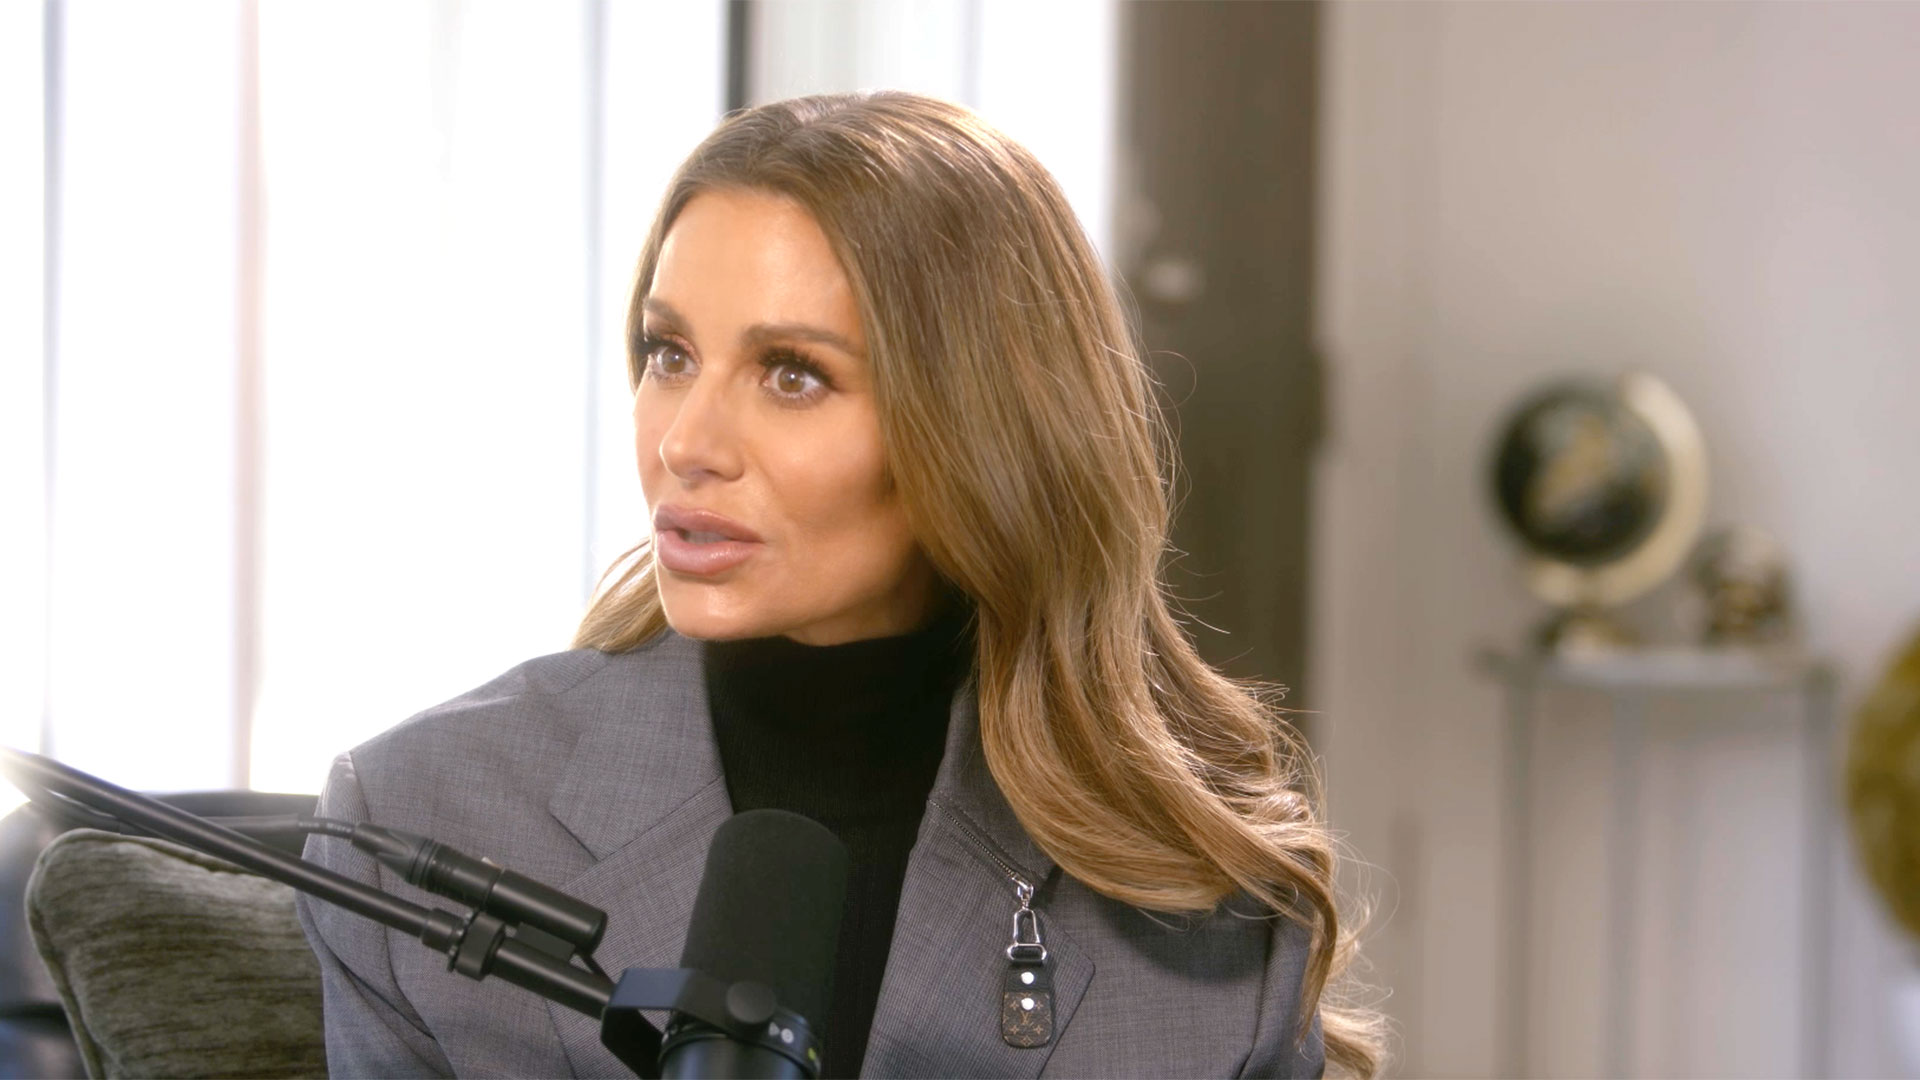 Dorit Kemsley Explains Why Garcelle's Jewelry Statement Hurt So Much